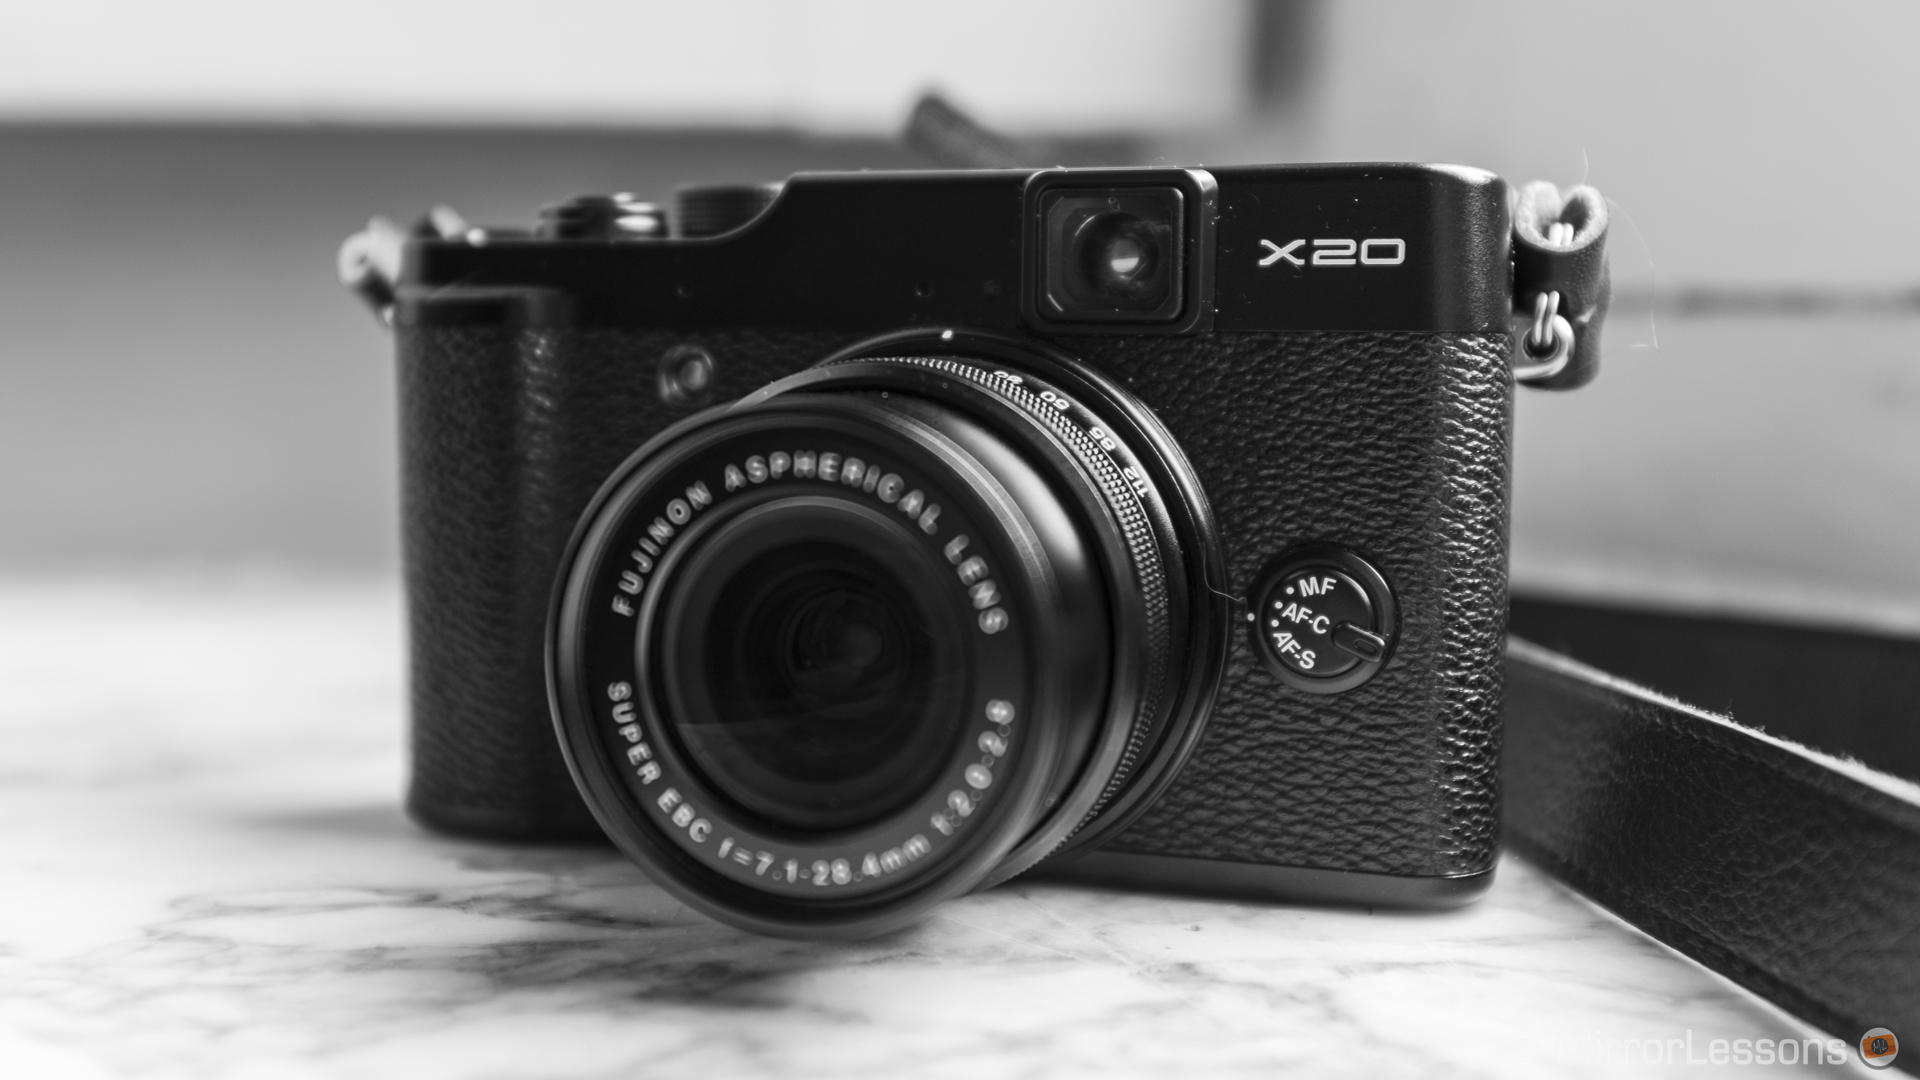 Fuji x20 Review: X-Pro1 technology in a body